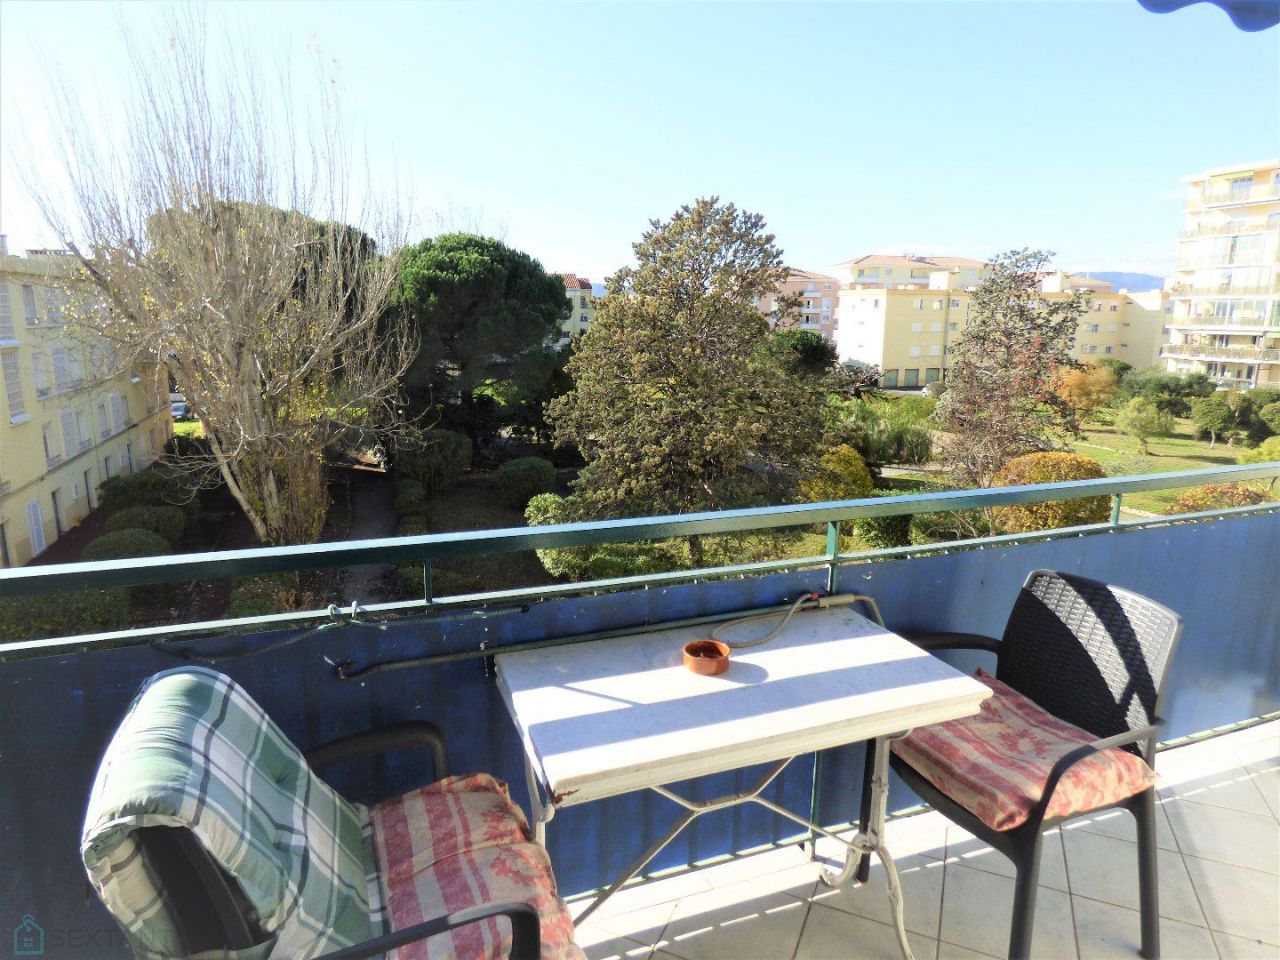 Apartment in Var, France - picture 1